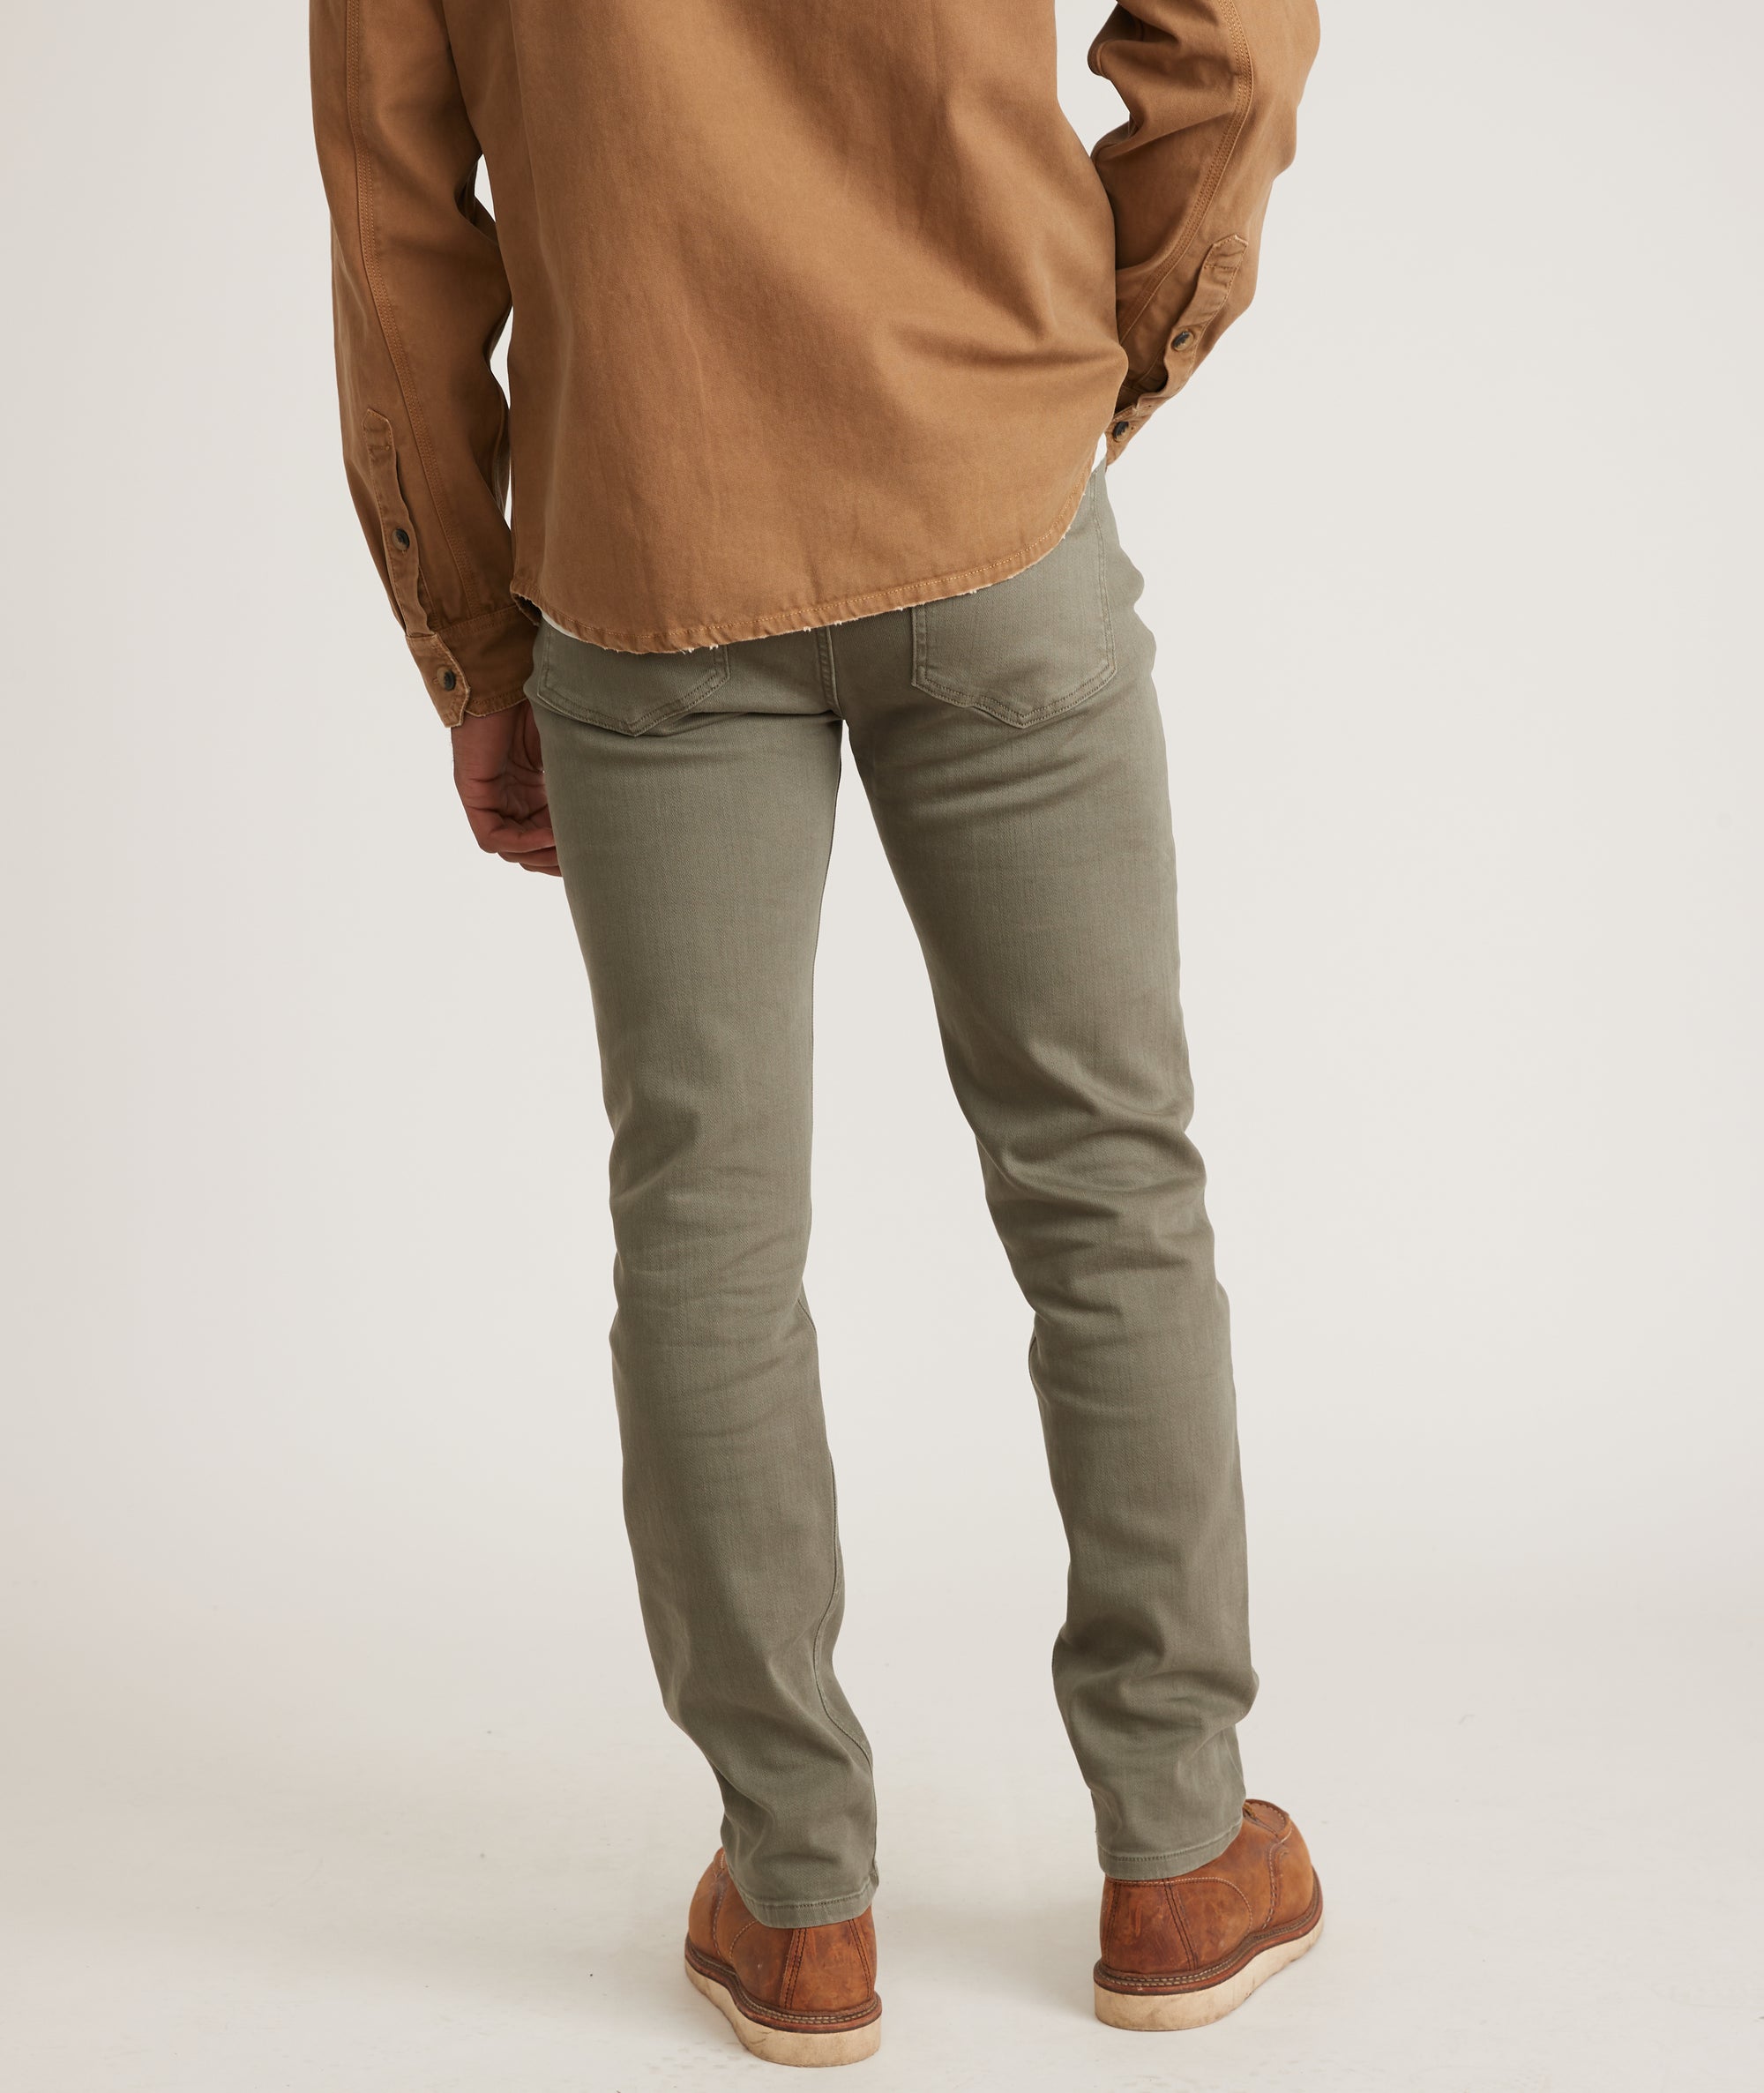 Faded Layer 5 – in Slim Olive Pocket Fit Marine Pant